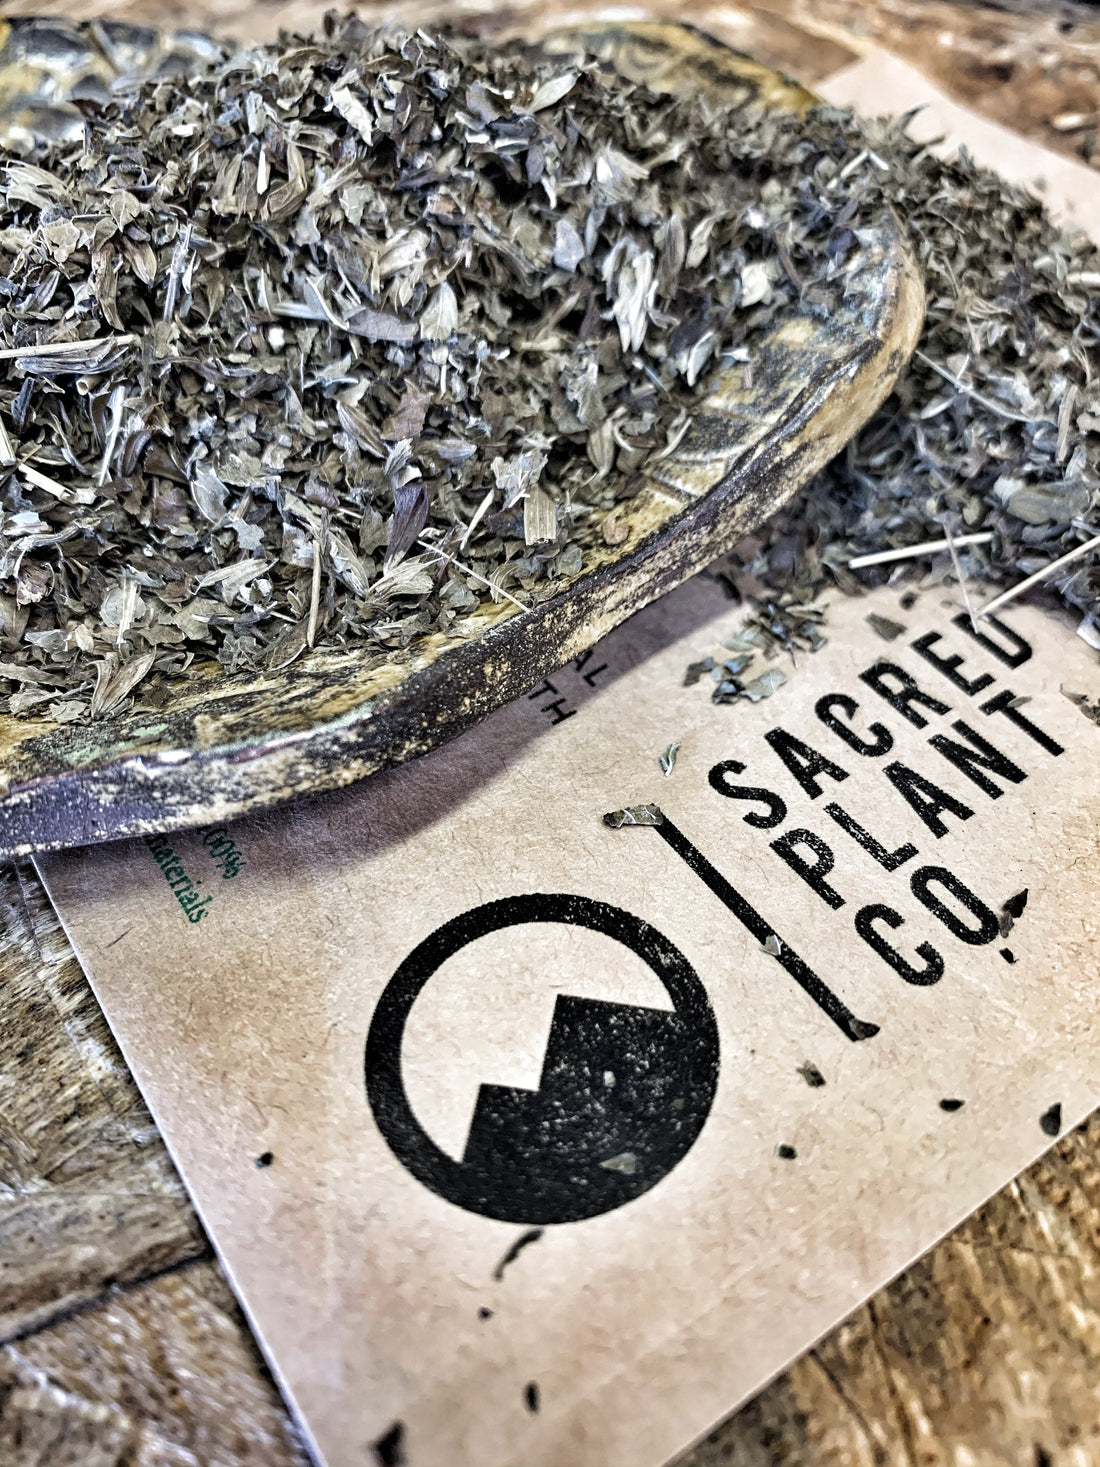 Close-up of dried lemon balm leaves on a rustic wooden bowl over a card with the Sacred Plant Co logo, accentuating the finely chopped texture and natural quality of the product.